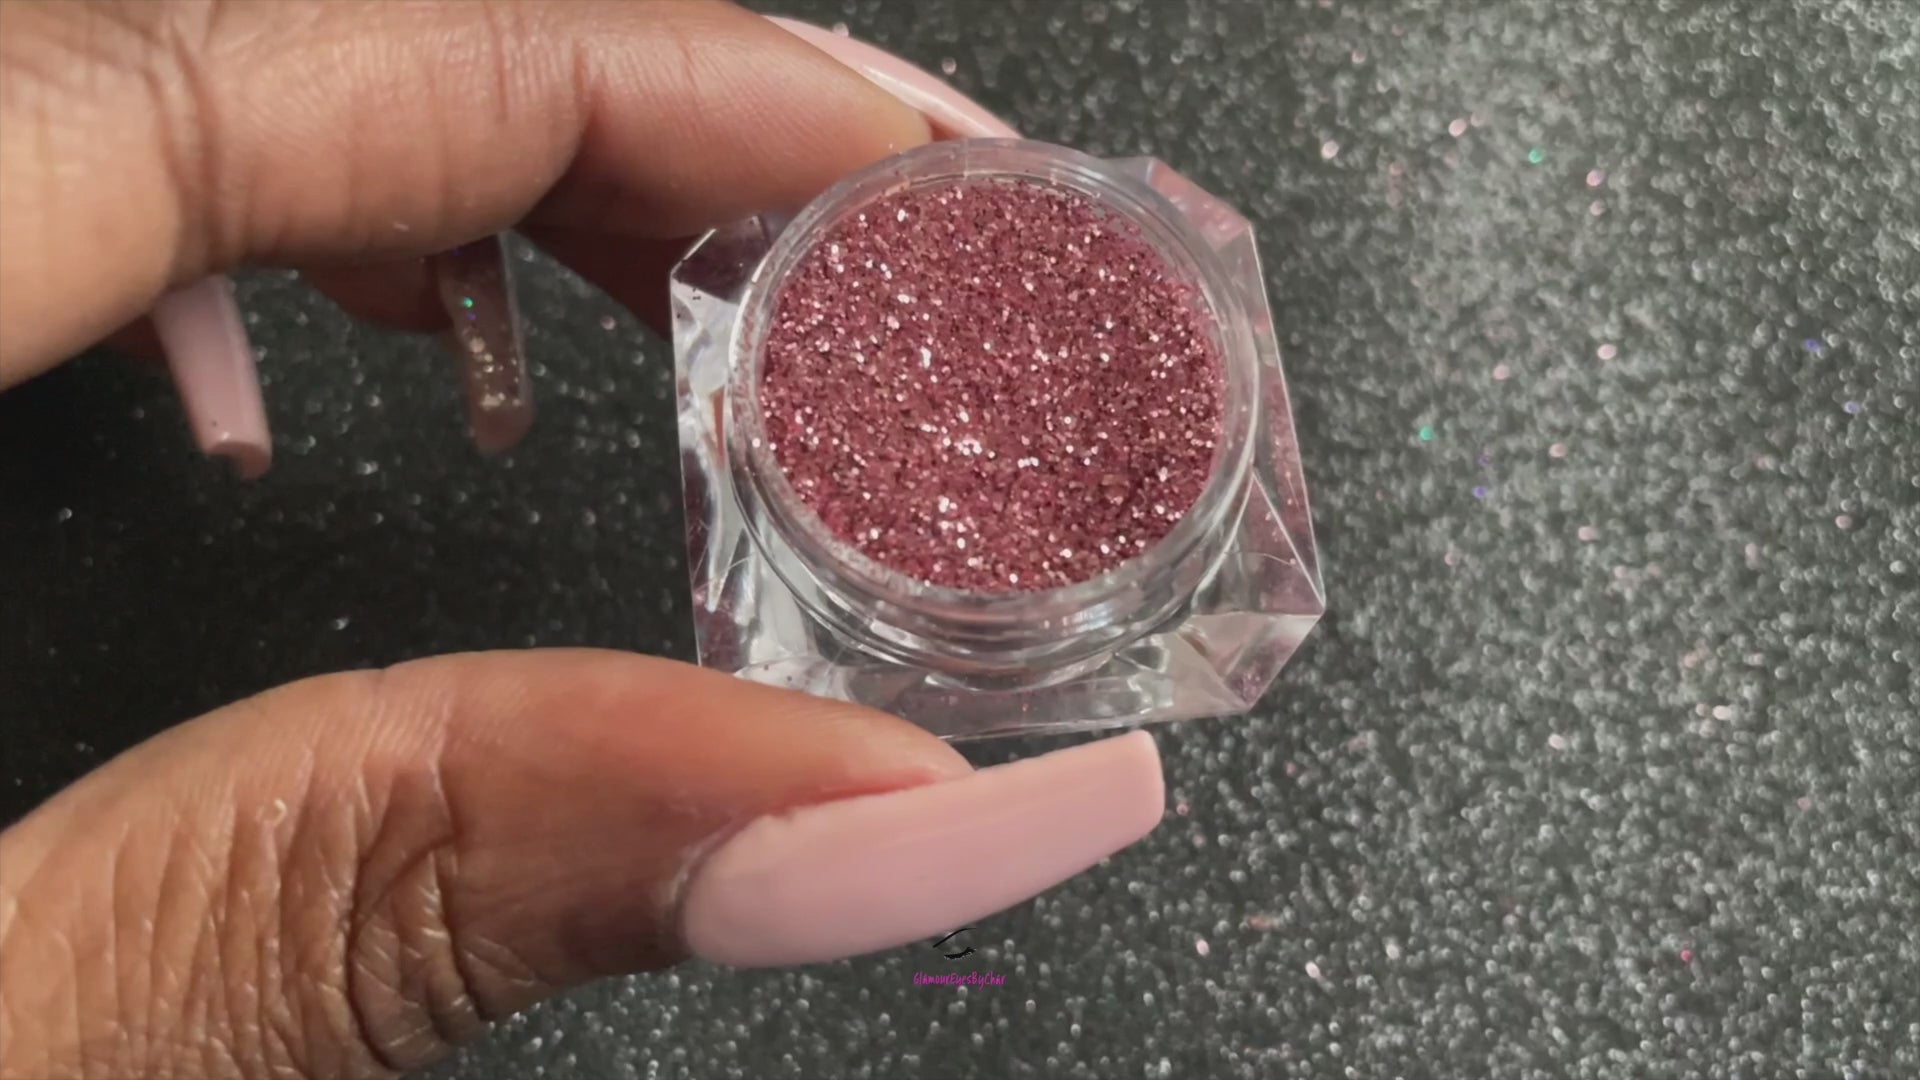  This glitter is part of the simple glitter collection. It consists of pink metallic glitter. Sweetie Pie can be used for your face, hair, body, nail art and glitter slime. Available in 5g jars only.